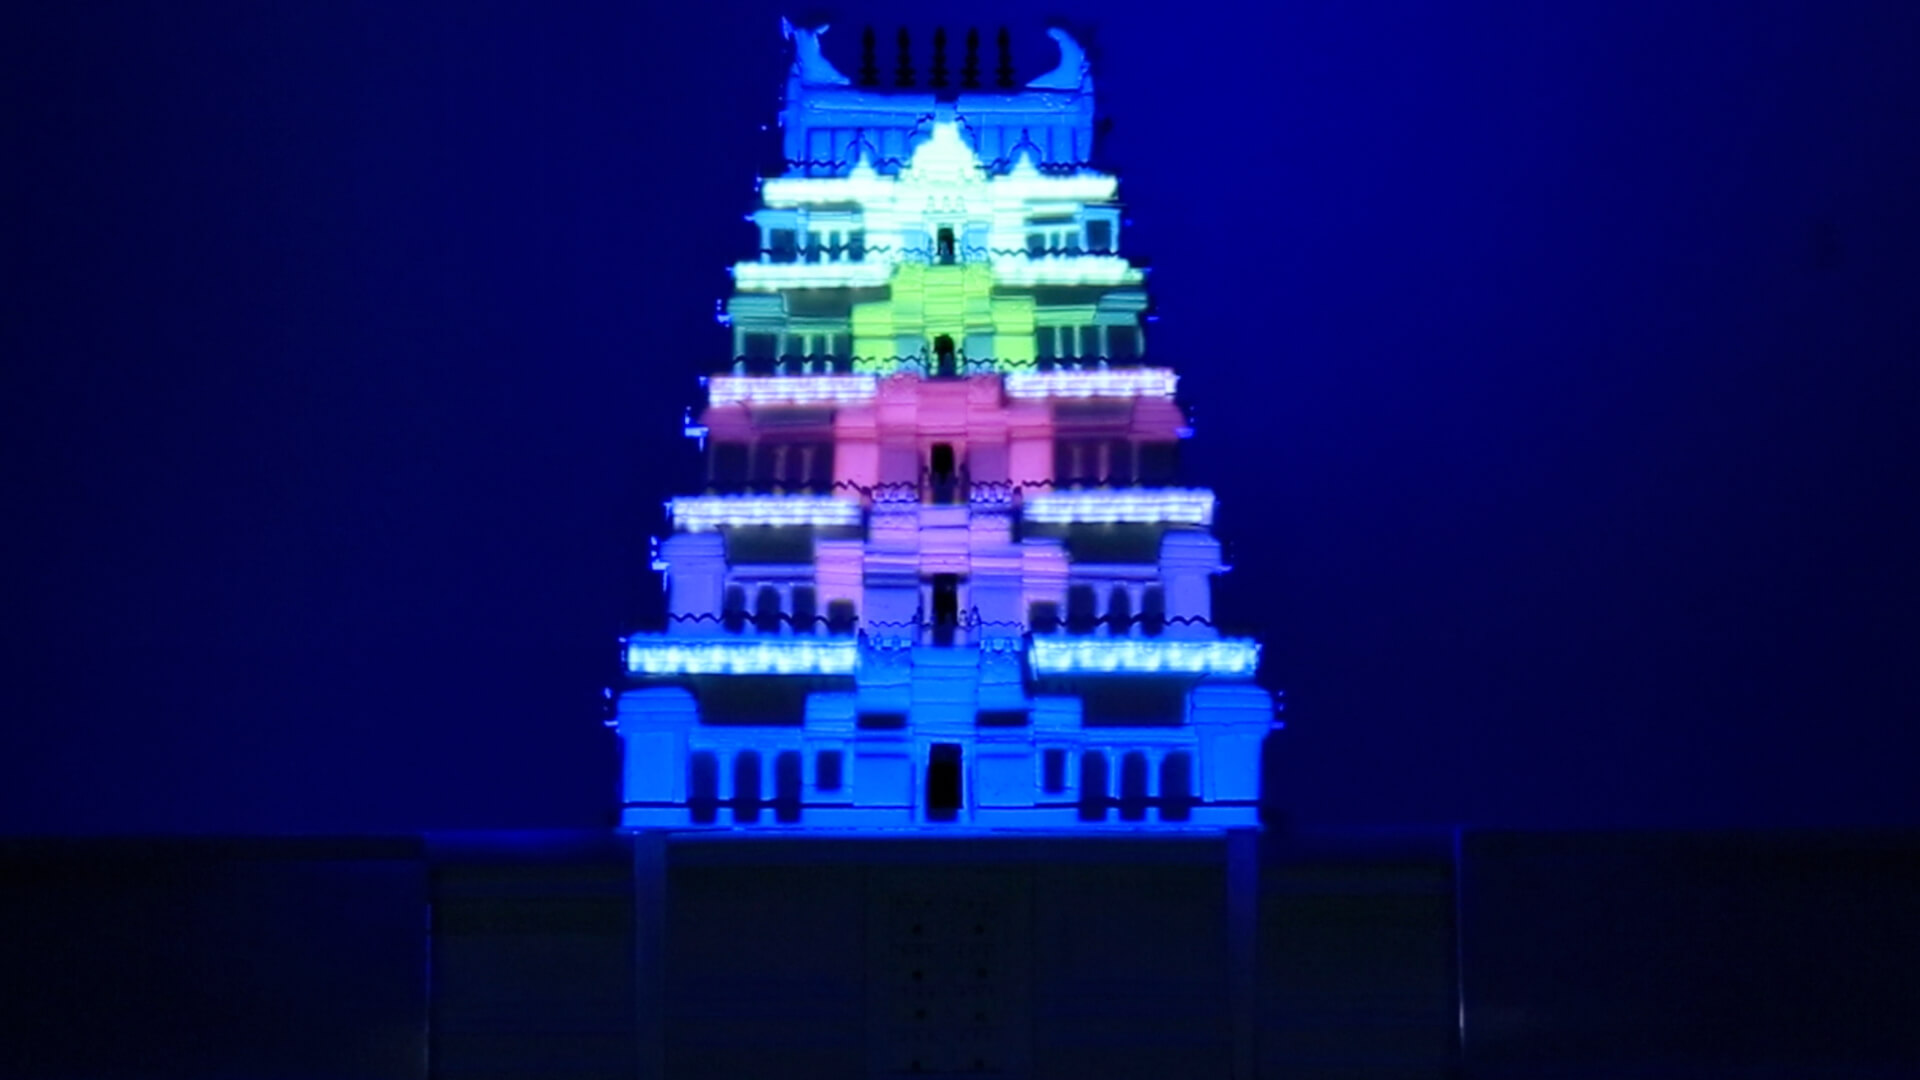 Temple projection mapping, immersive media, video mapping